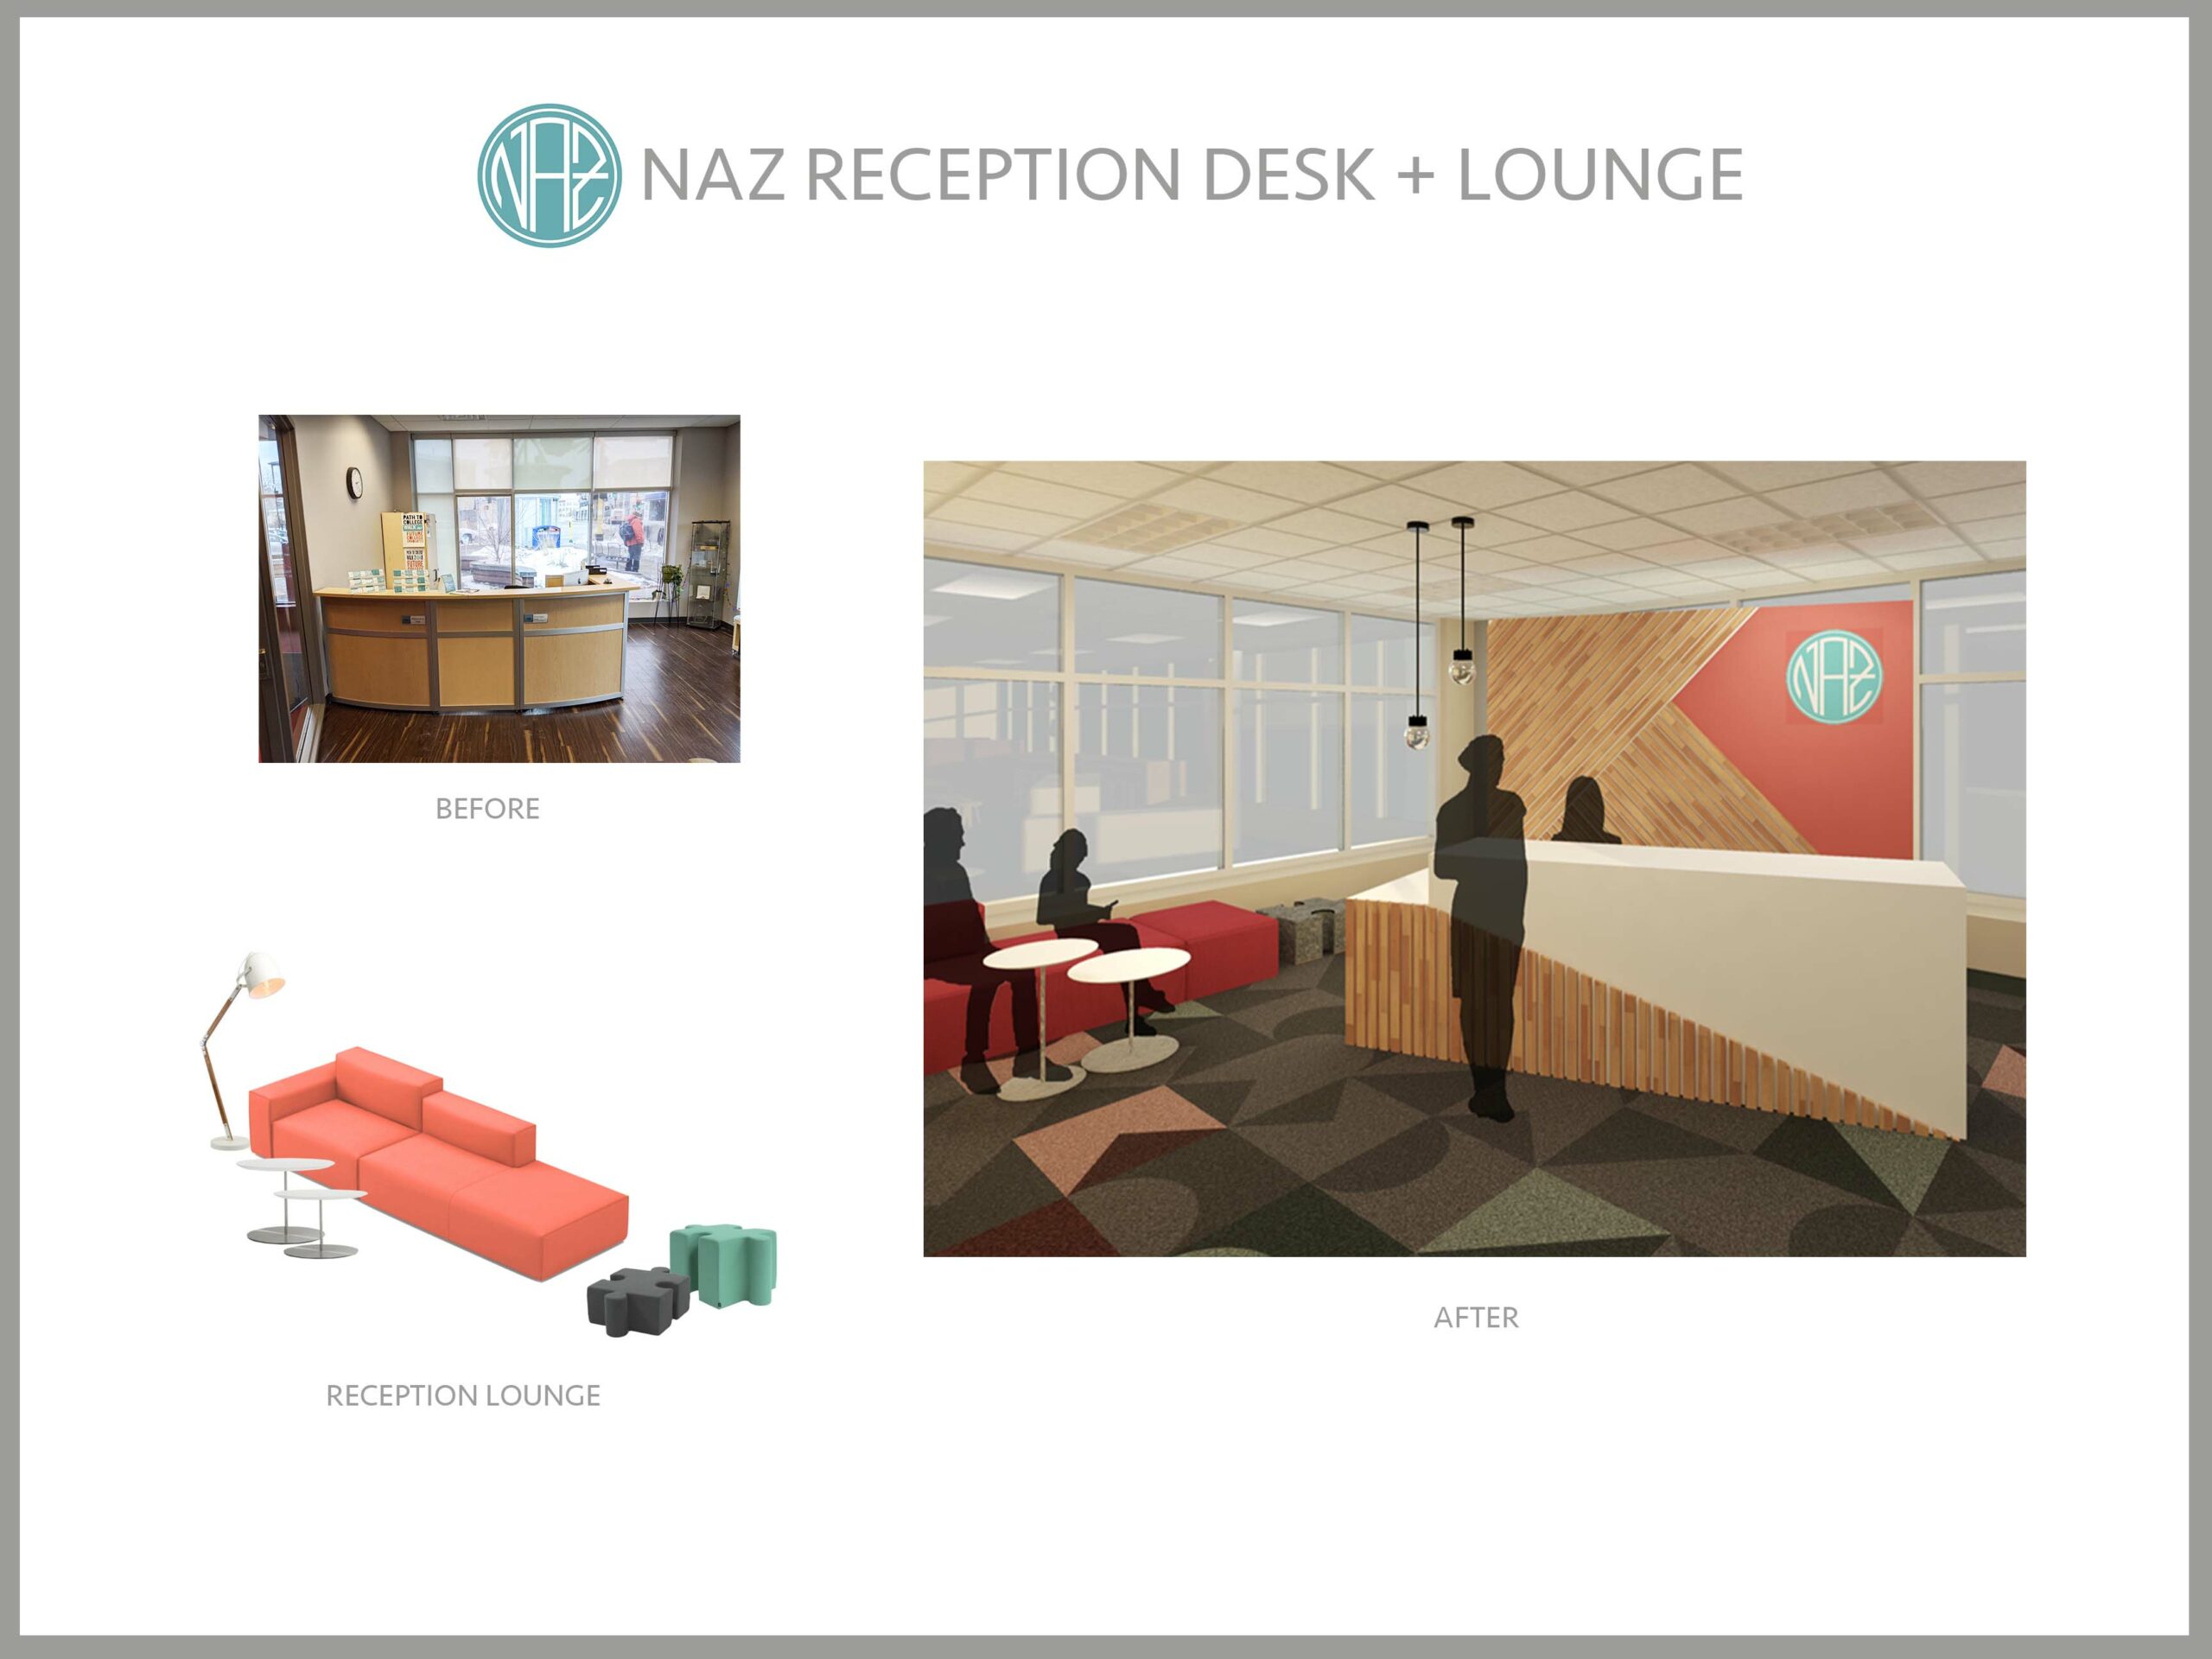 Naz and Design for a Difference